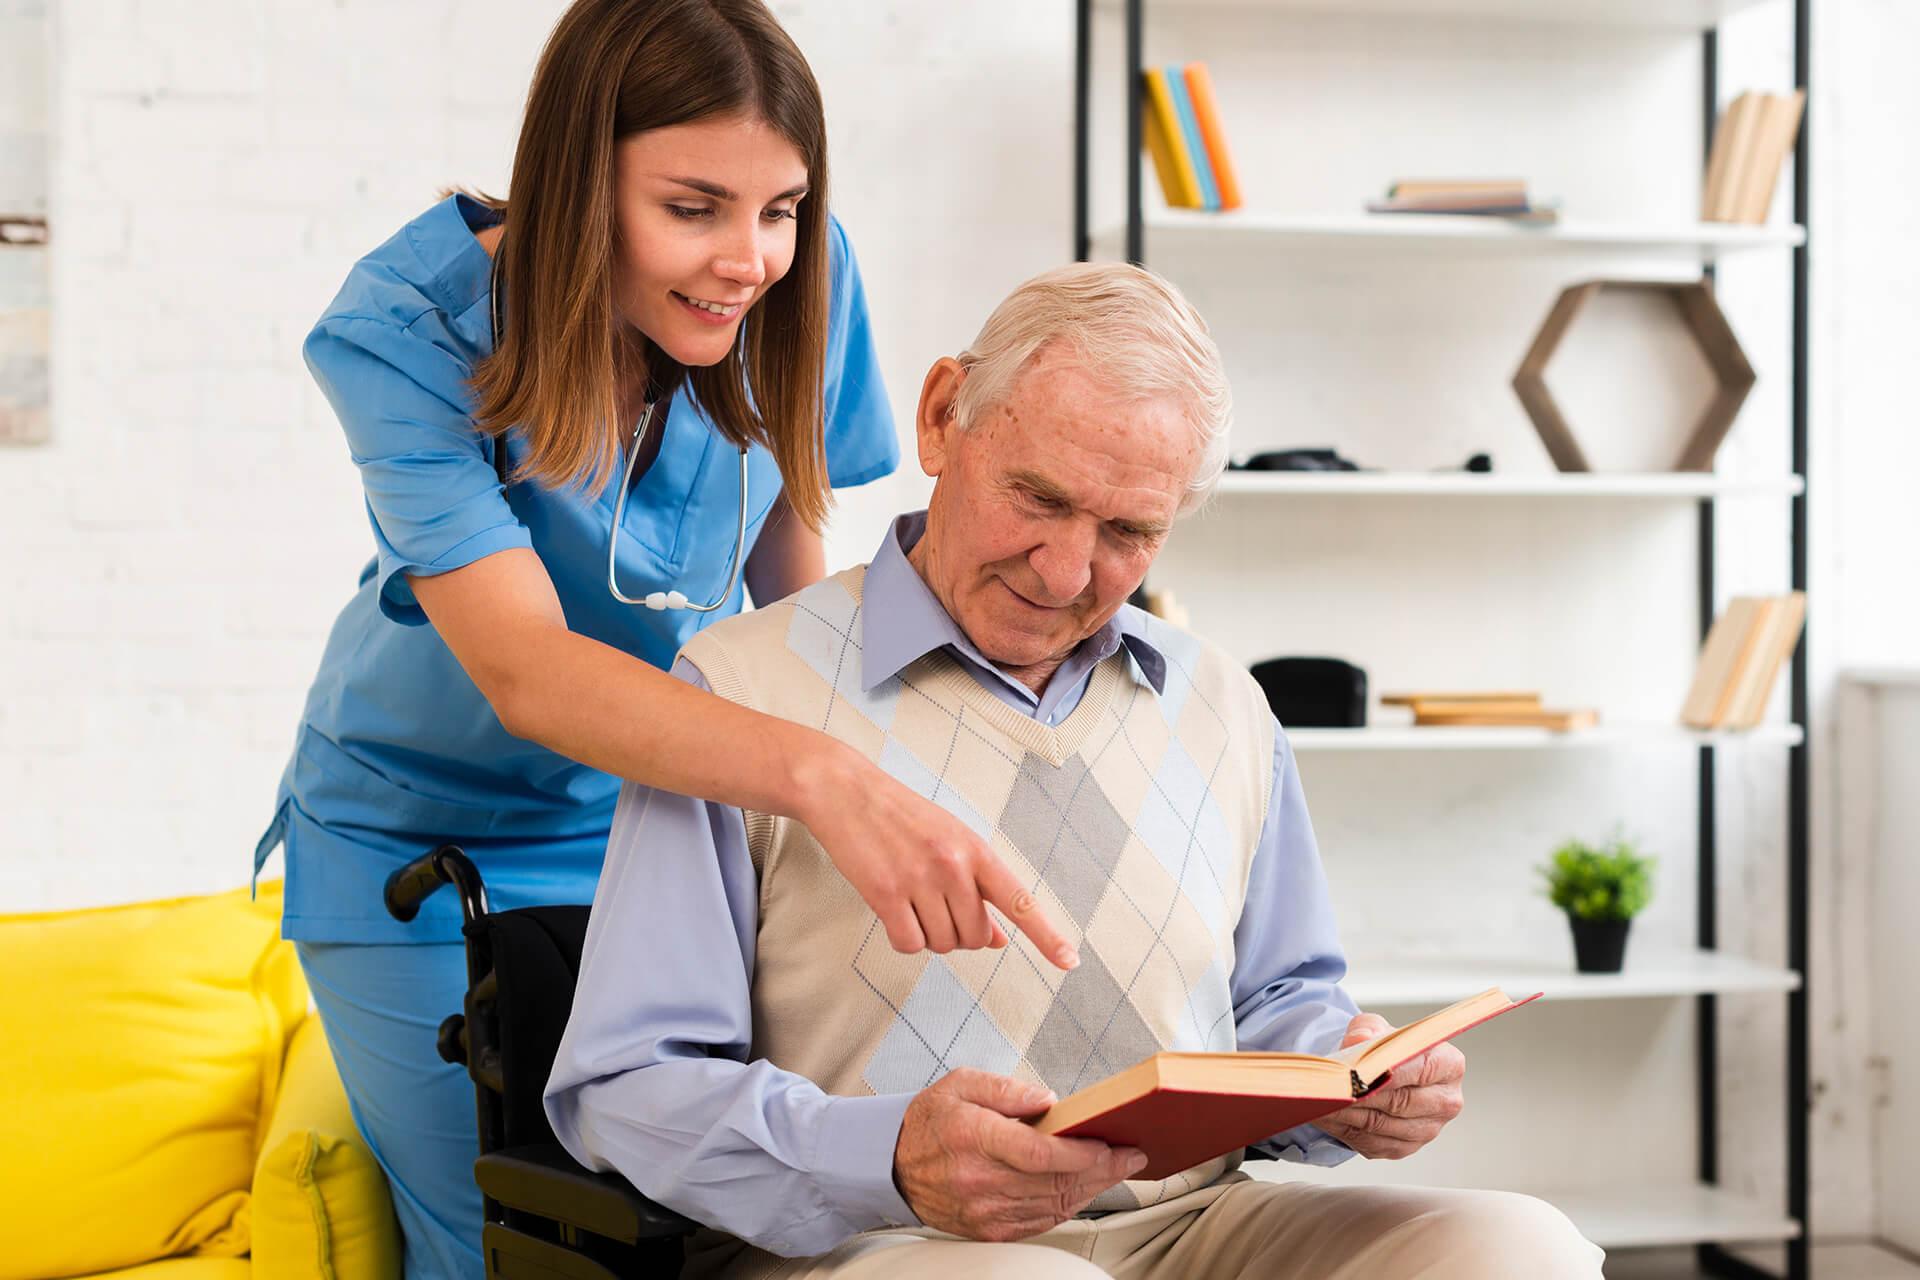 What are the benefits of having certified nursing assistants?